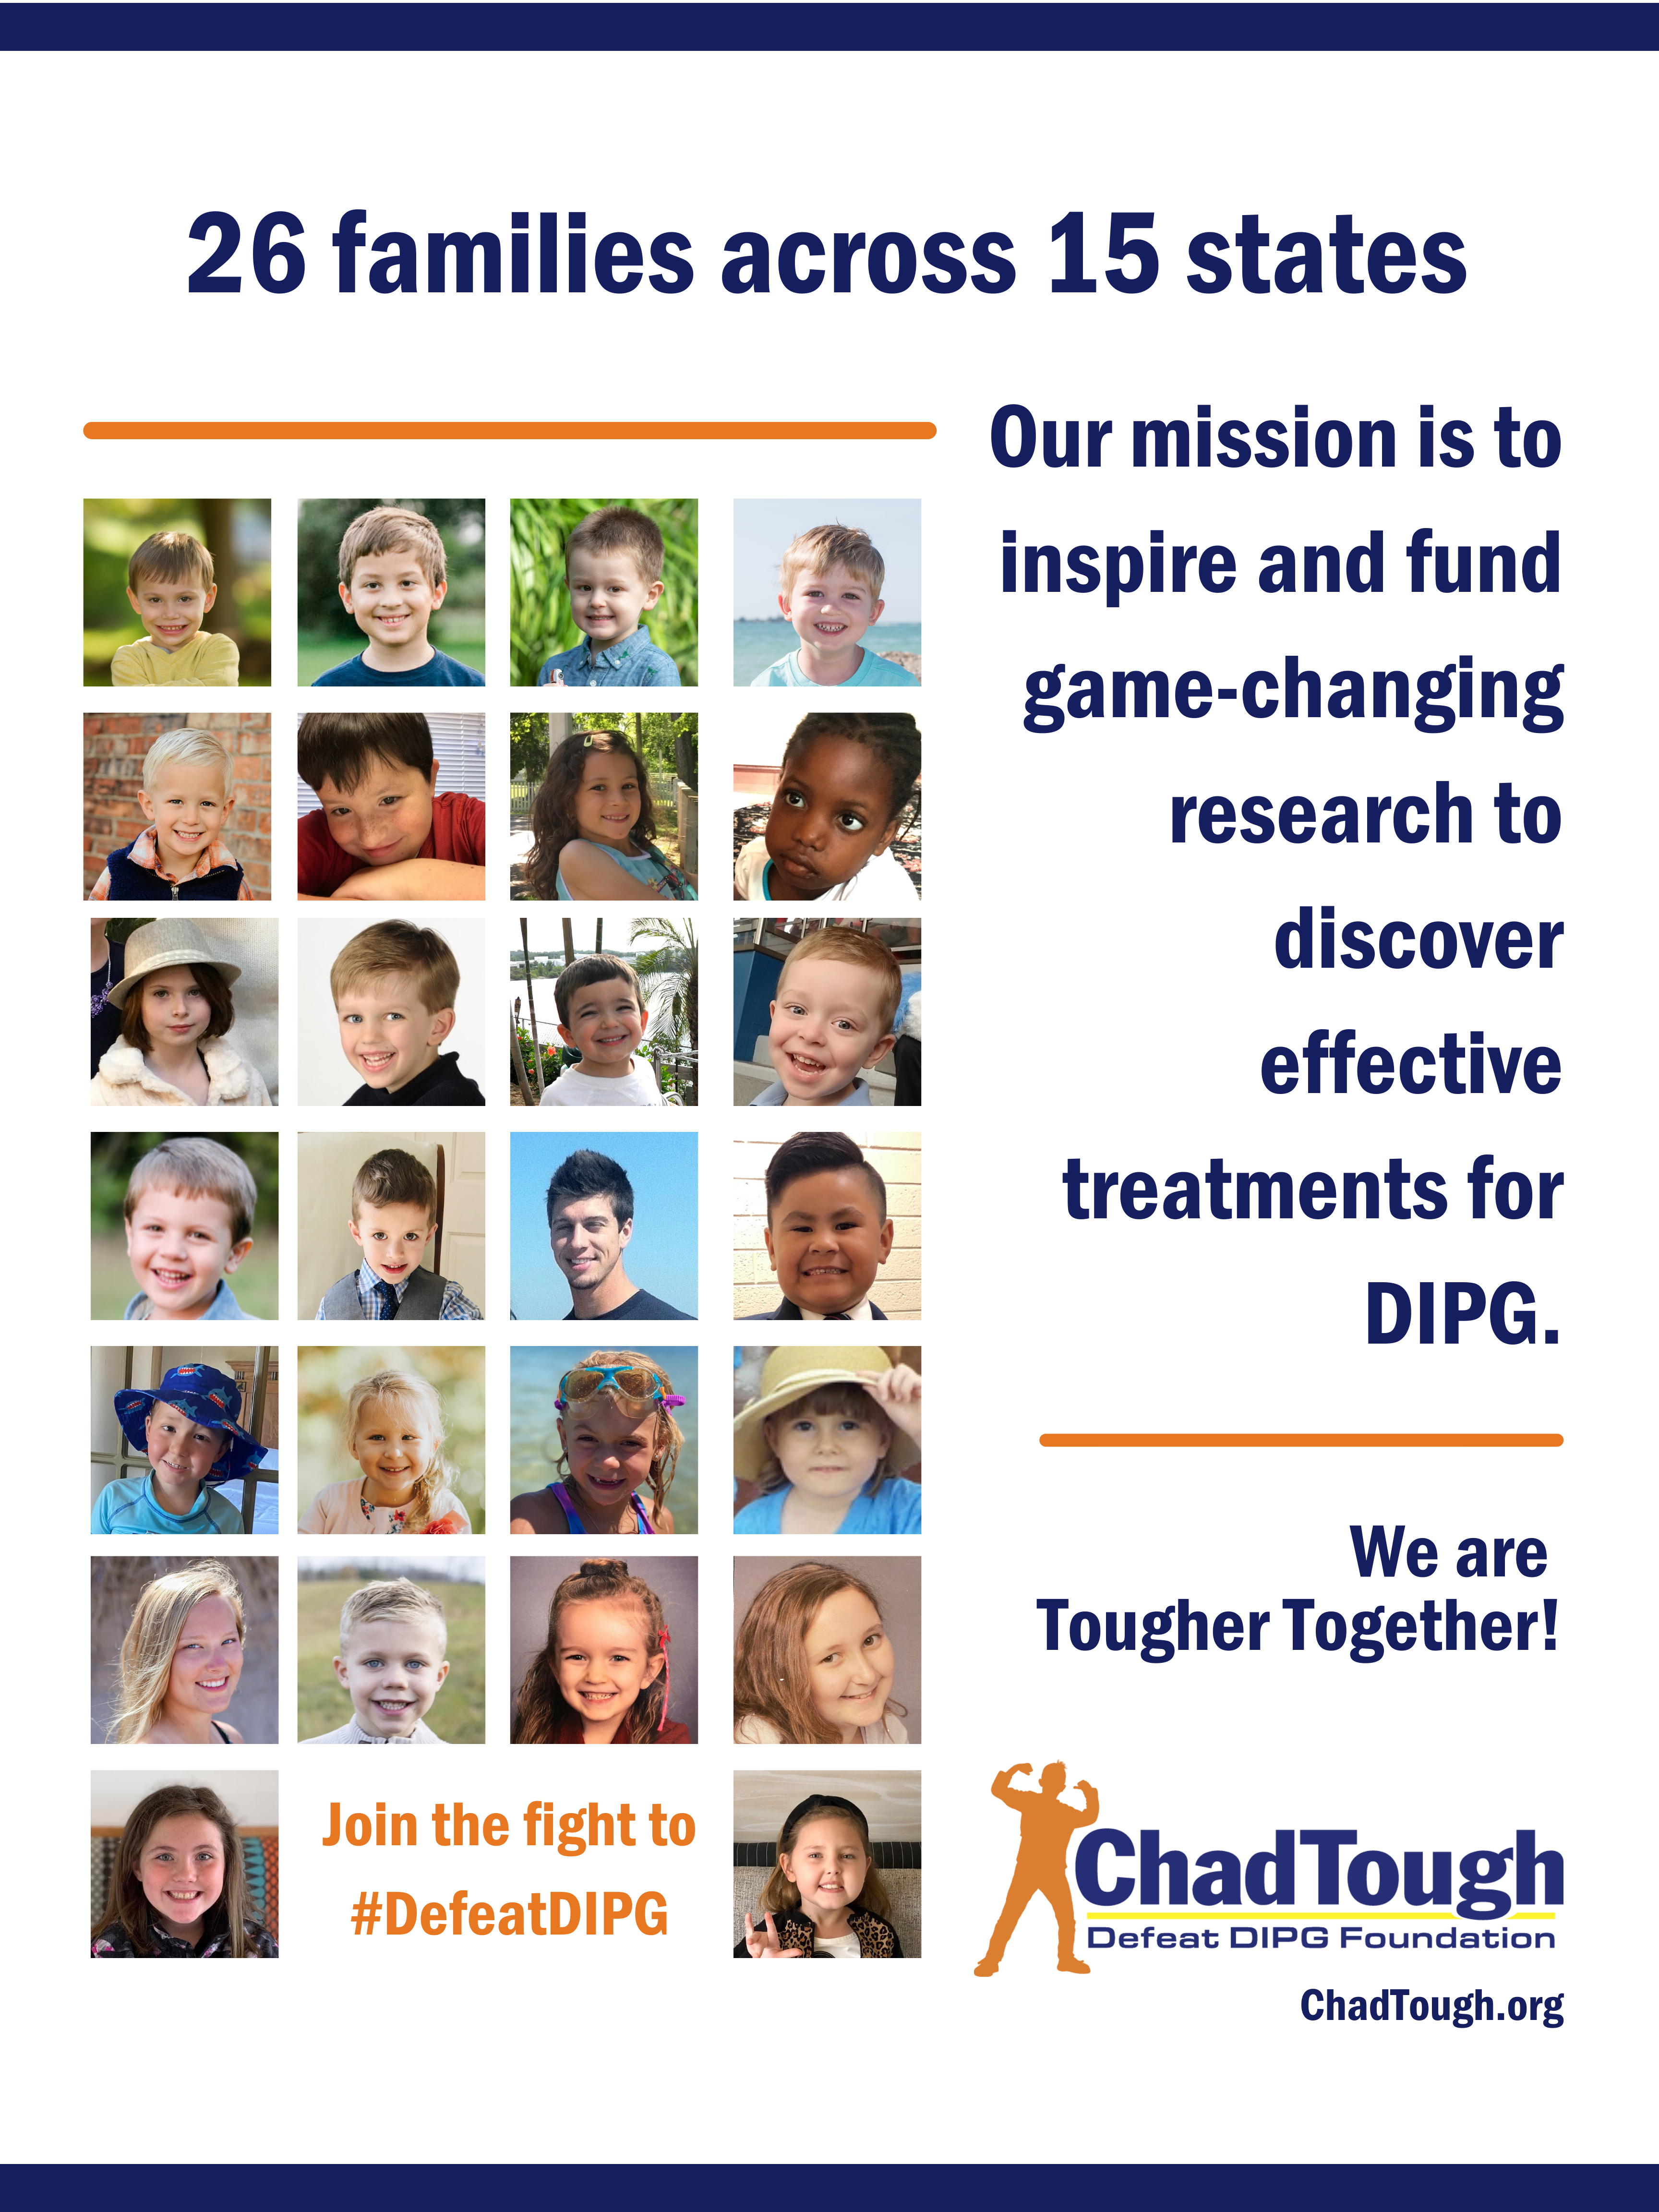 Families fighting to #Defeat DIPG, the deadliest form of pediatric cancer